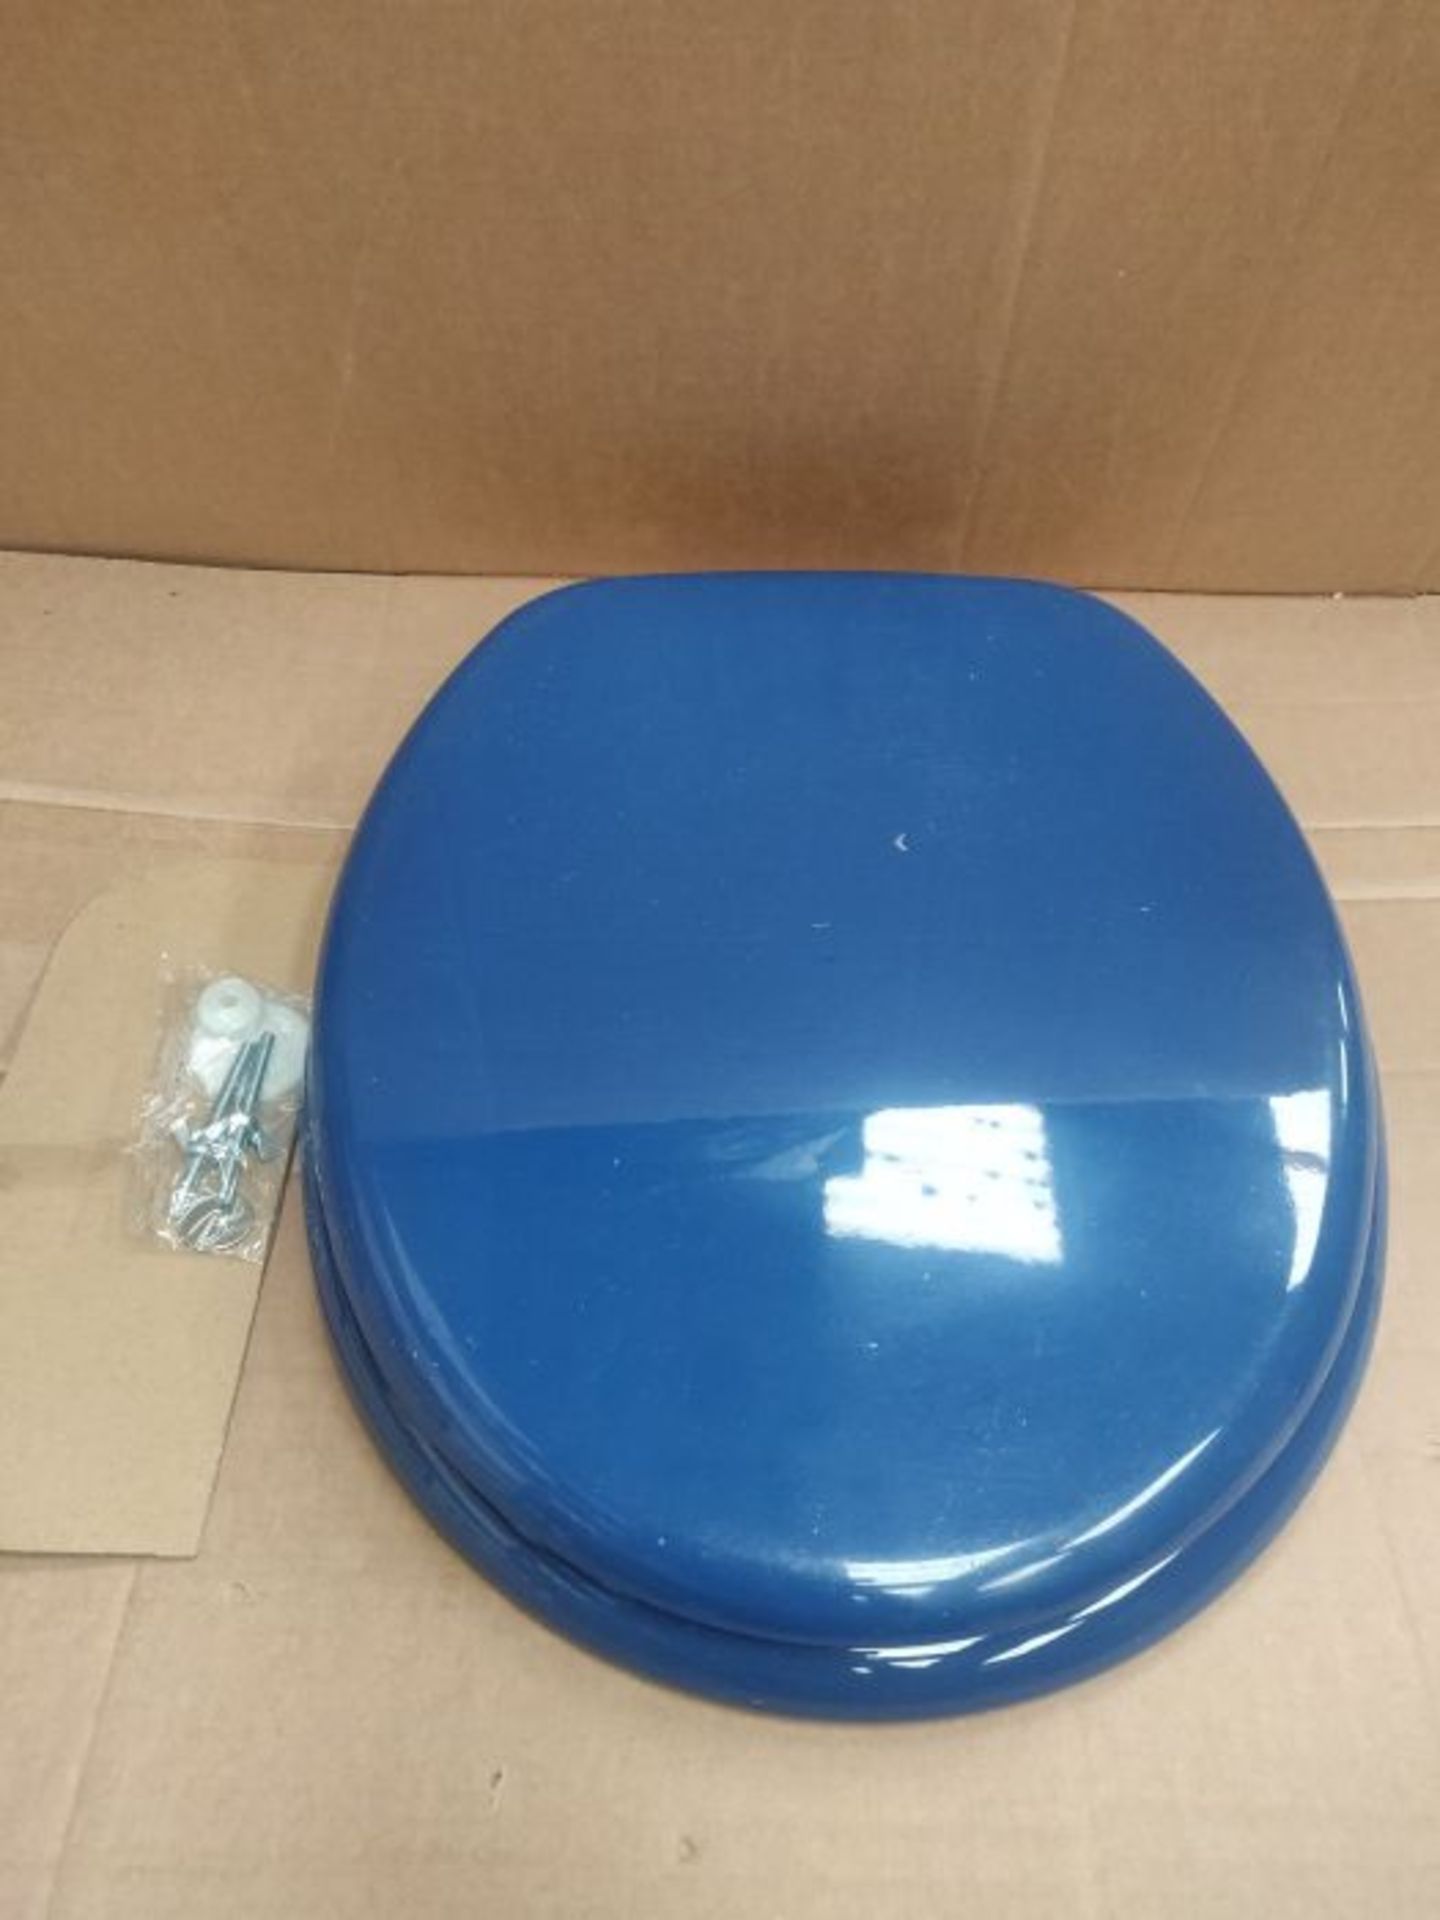 [INCOMPLETE] ADOB 87065 Toilet Seat with Adjustable Metal Hinges, Blue with Wooden Cor - Image 3 of 3